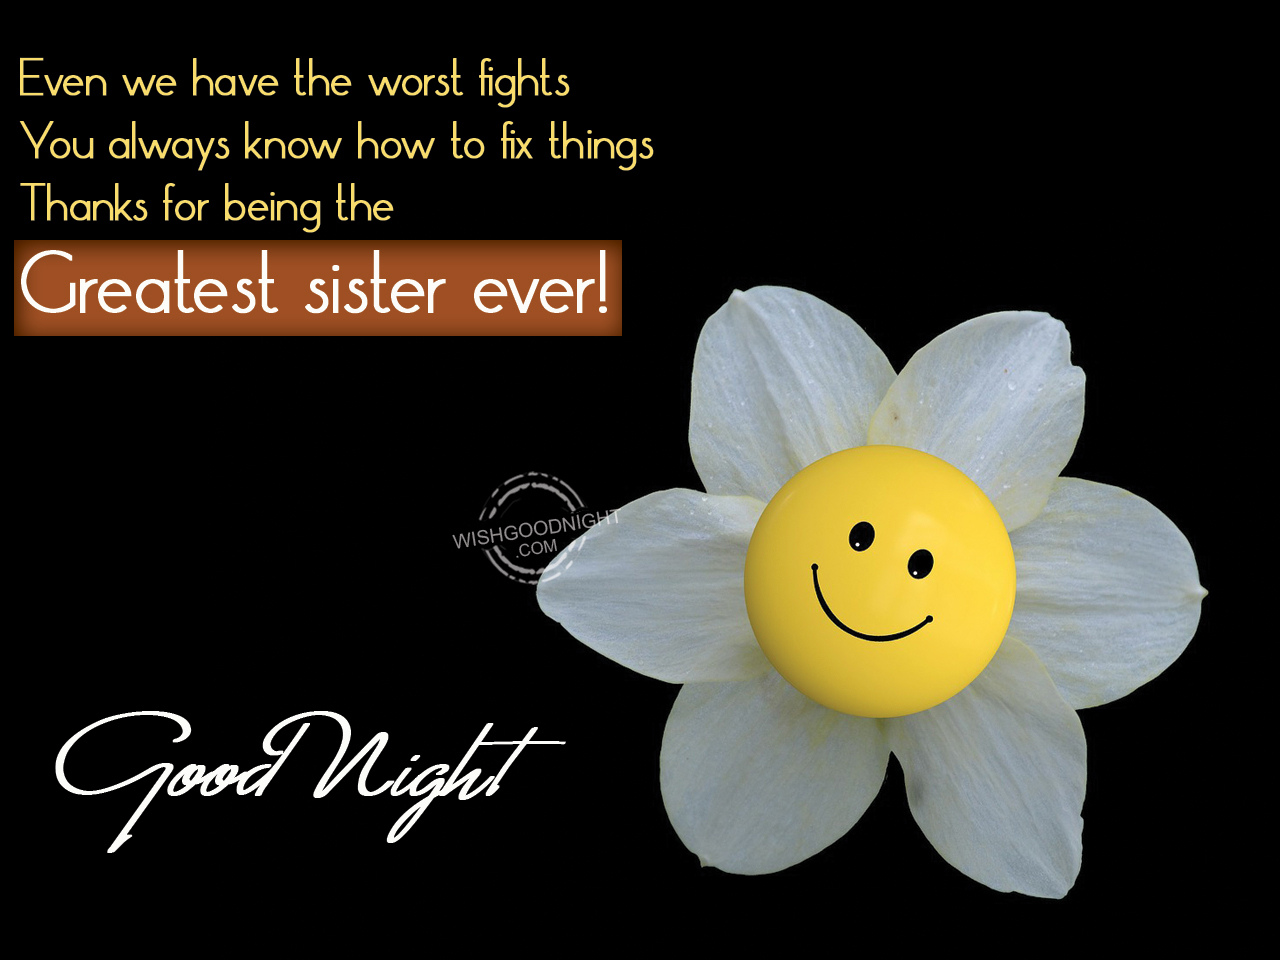 Good Night Wishes Images With Sweet Messages For Beautiful Sister.